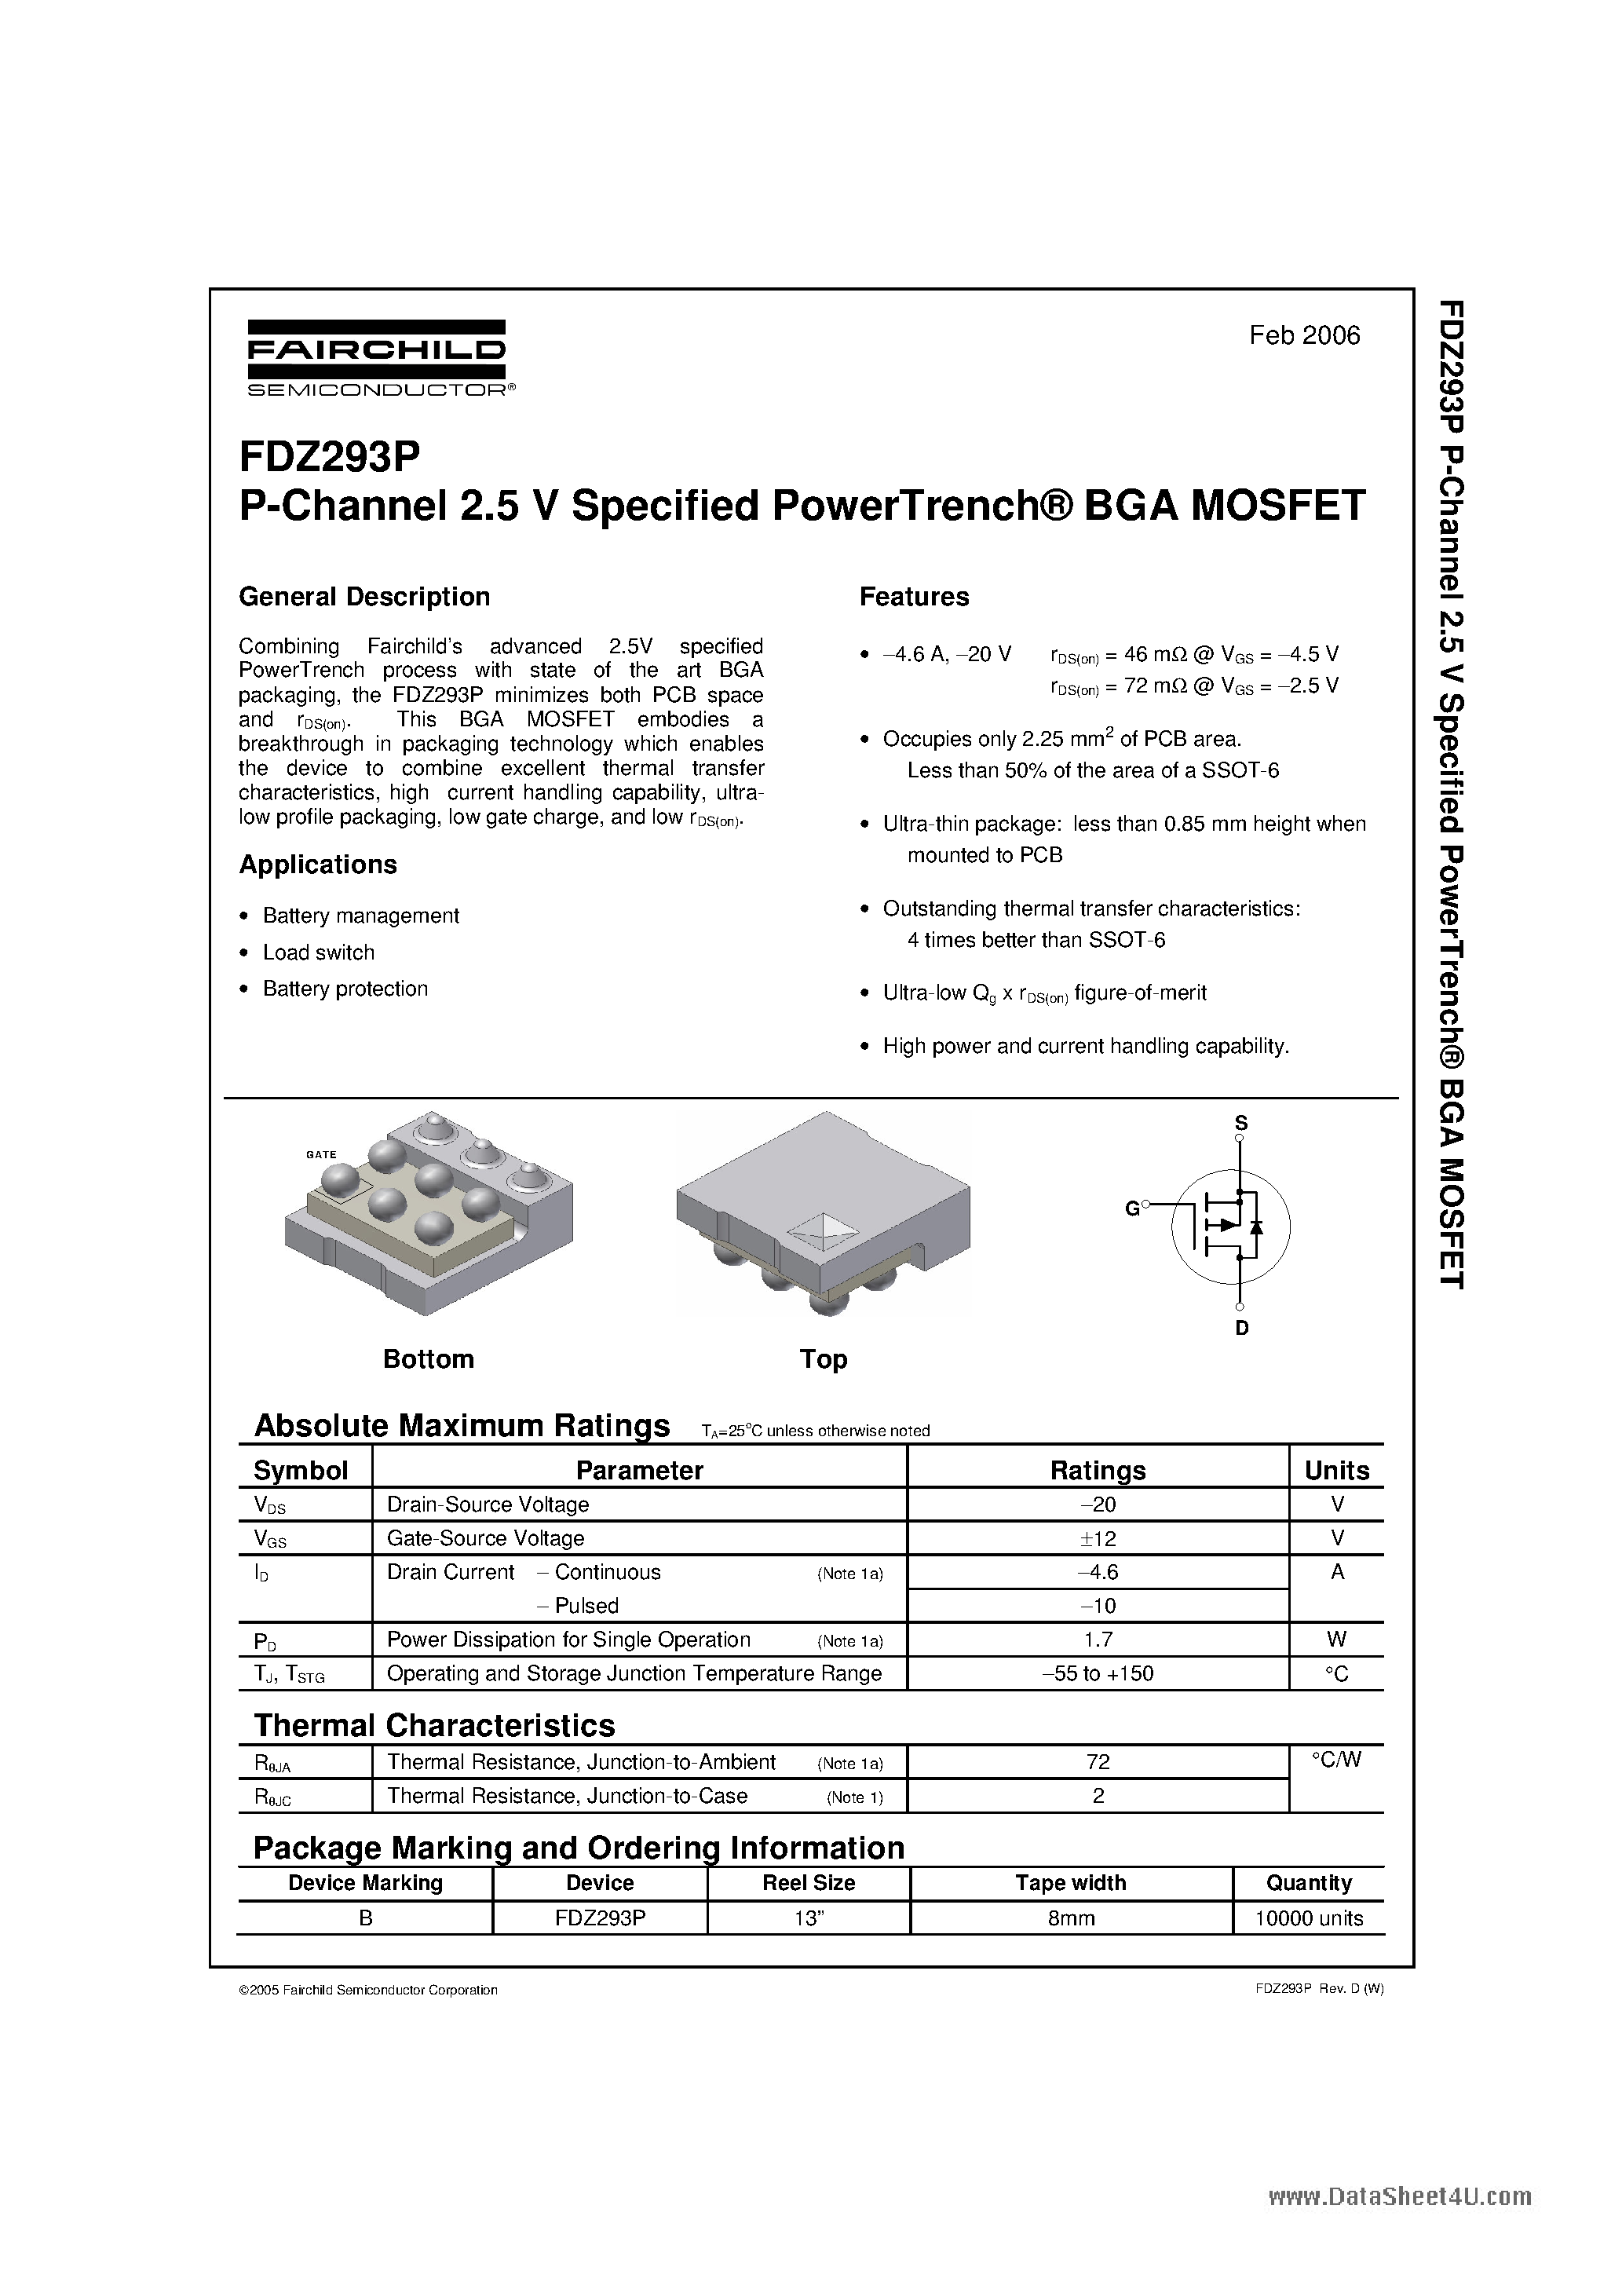 Datasheet FDZ293P - P-Channel 2.5 V Specified PowerTrench BGA MOSFET page 1